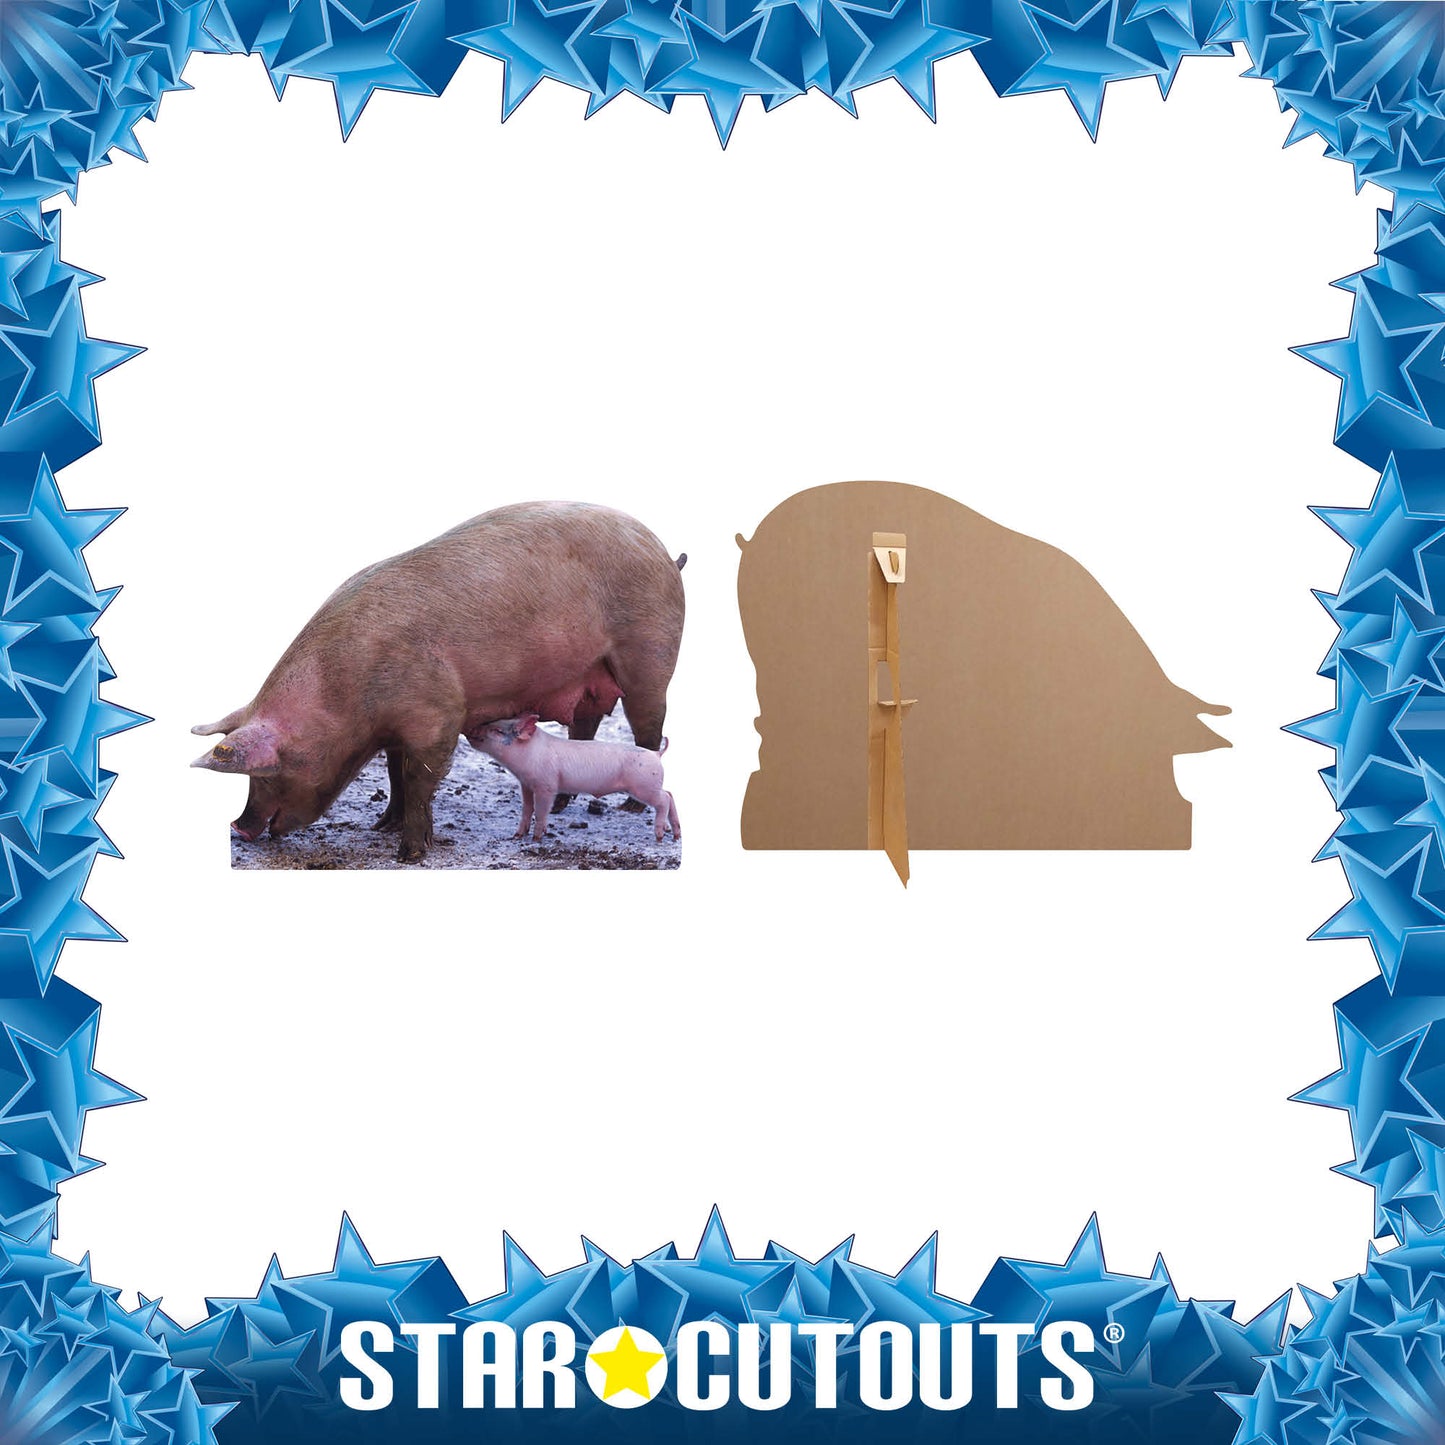 Pig and Piglet British Countryside and Farm Theme Animal Cardboard Cutout